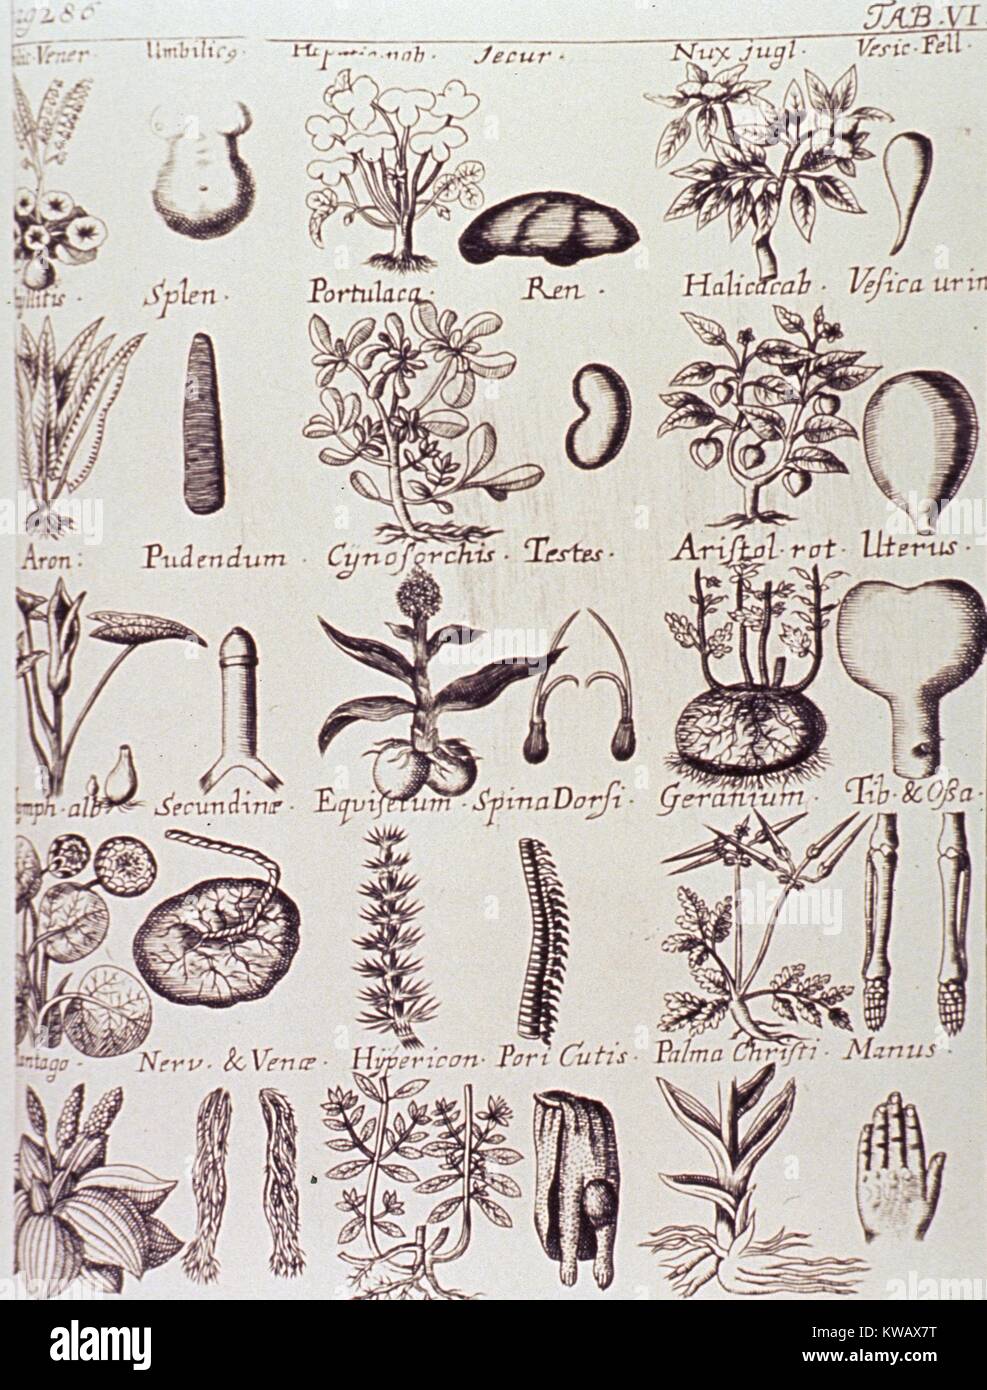 Illustration of medicinal plants and their value to different parts of the human body, 1713. Courtesy National Library of Medicine. Stock Photo